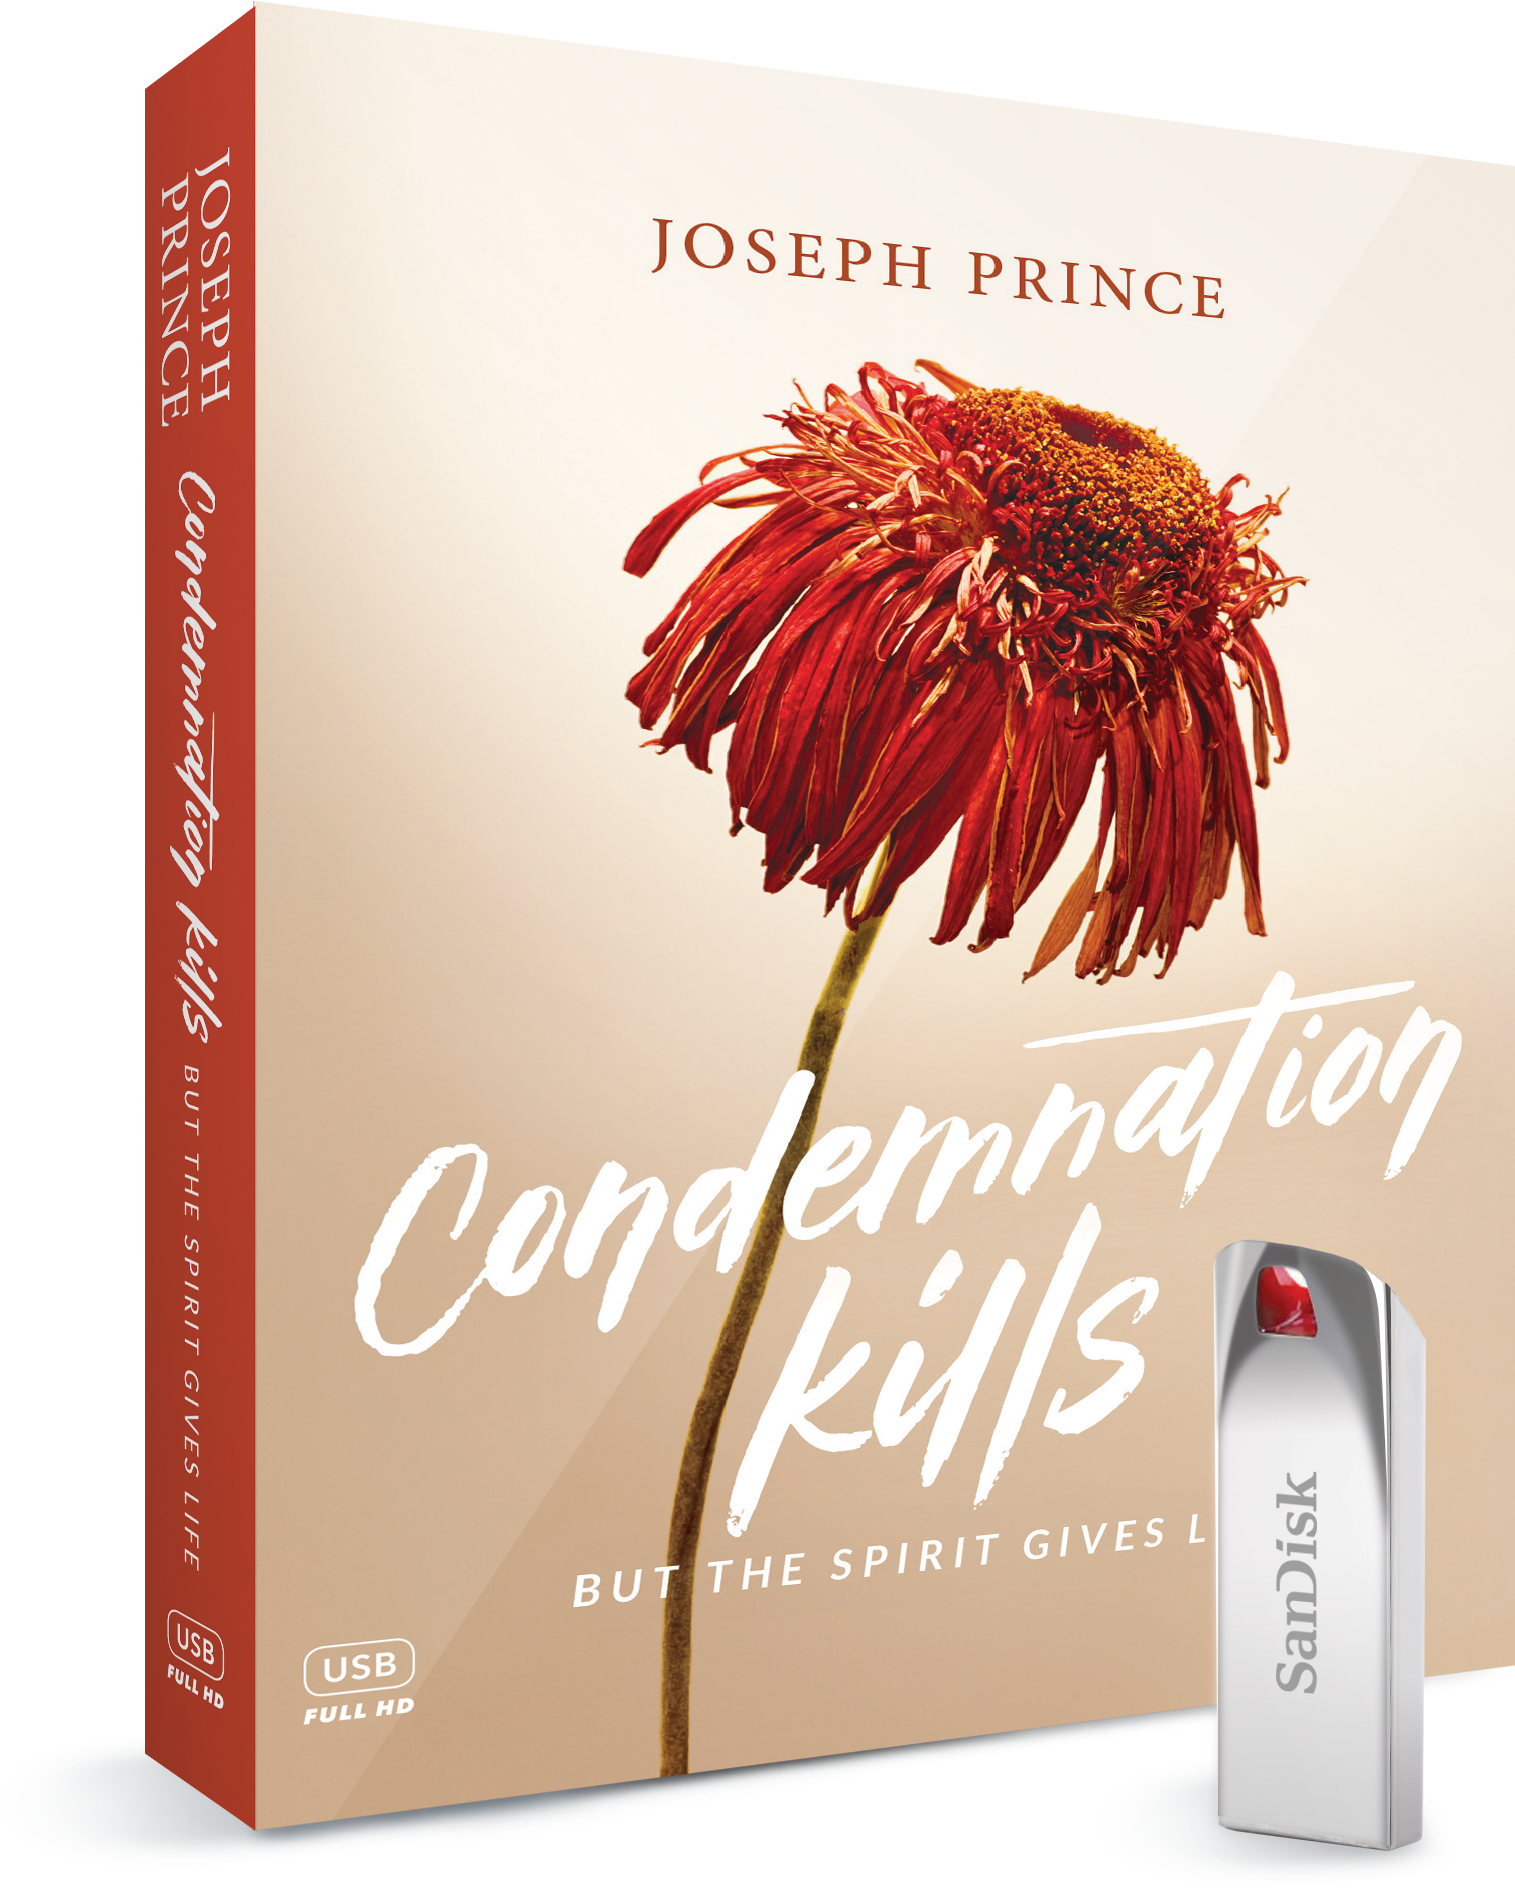 Condemnation Kills But The Spirit Gives Life USB Series